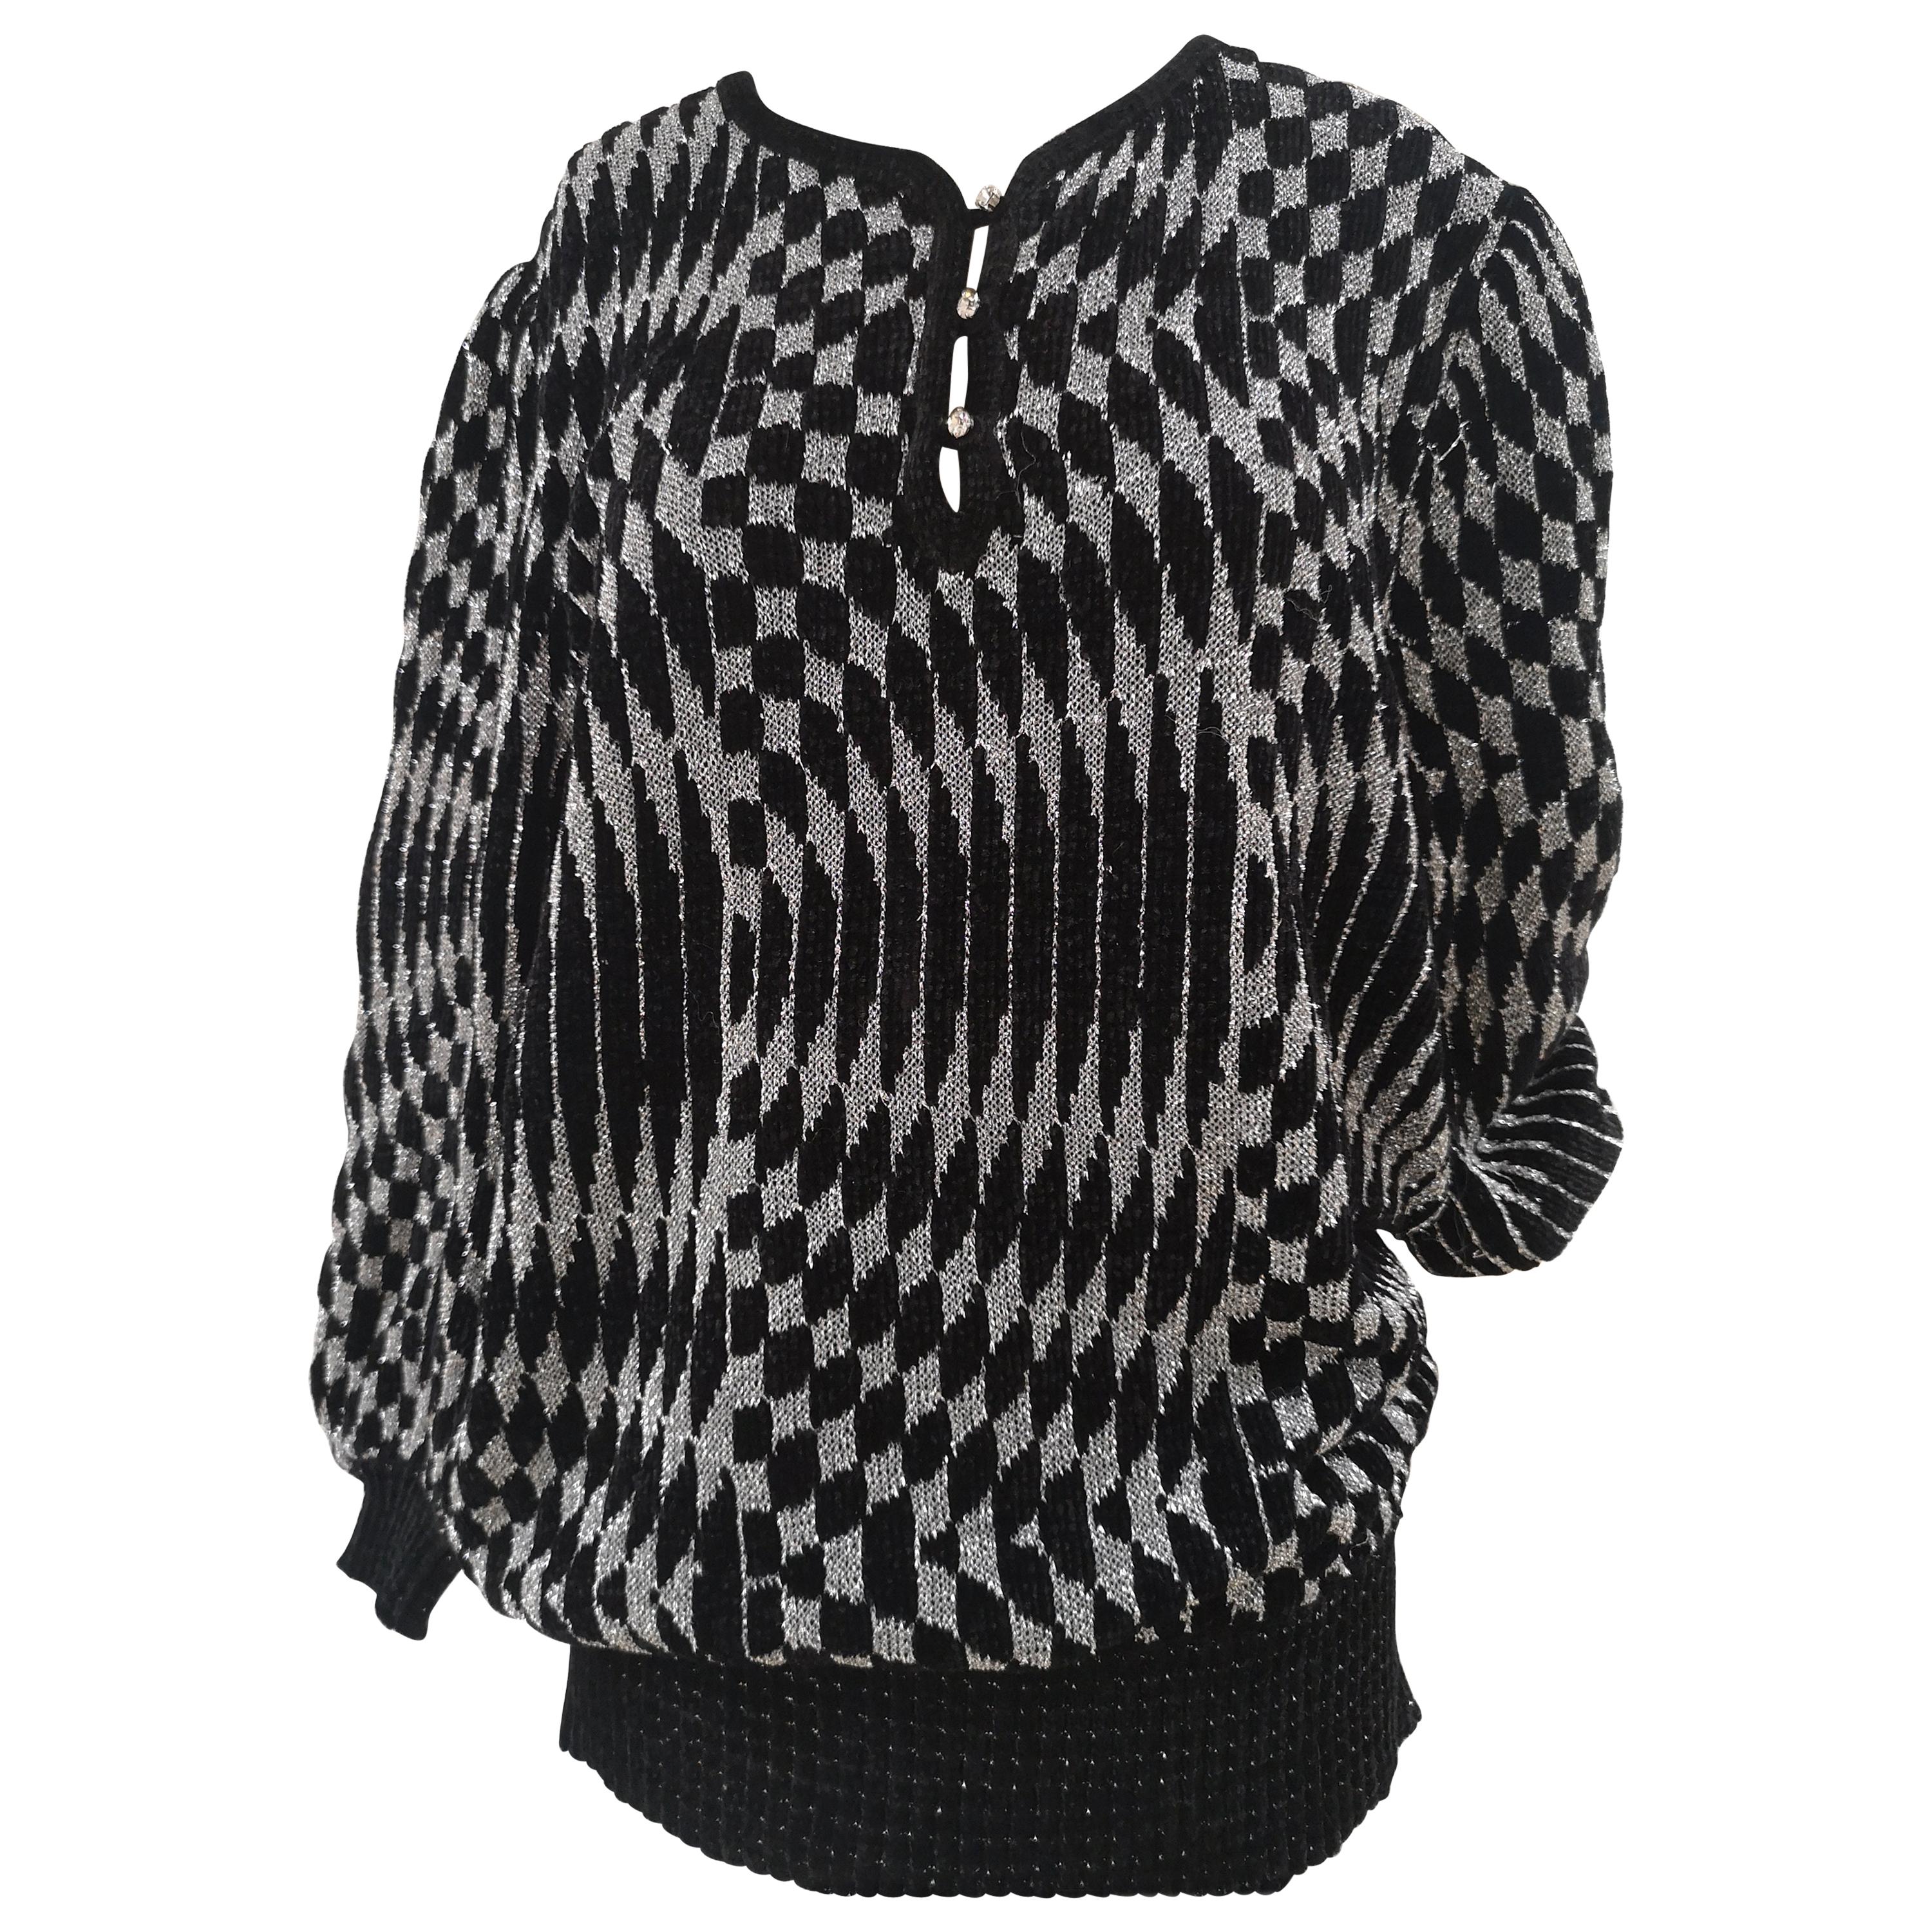 Lilly florence black and silver sweater